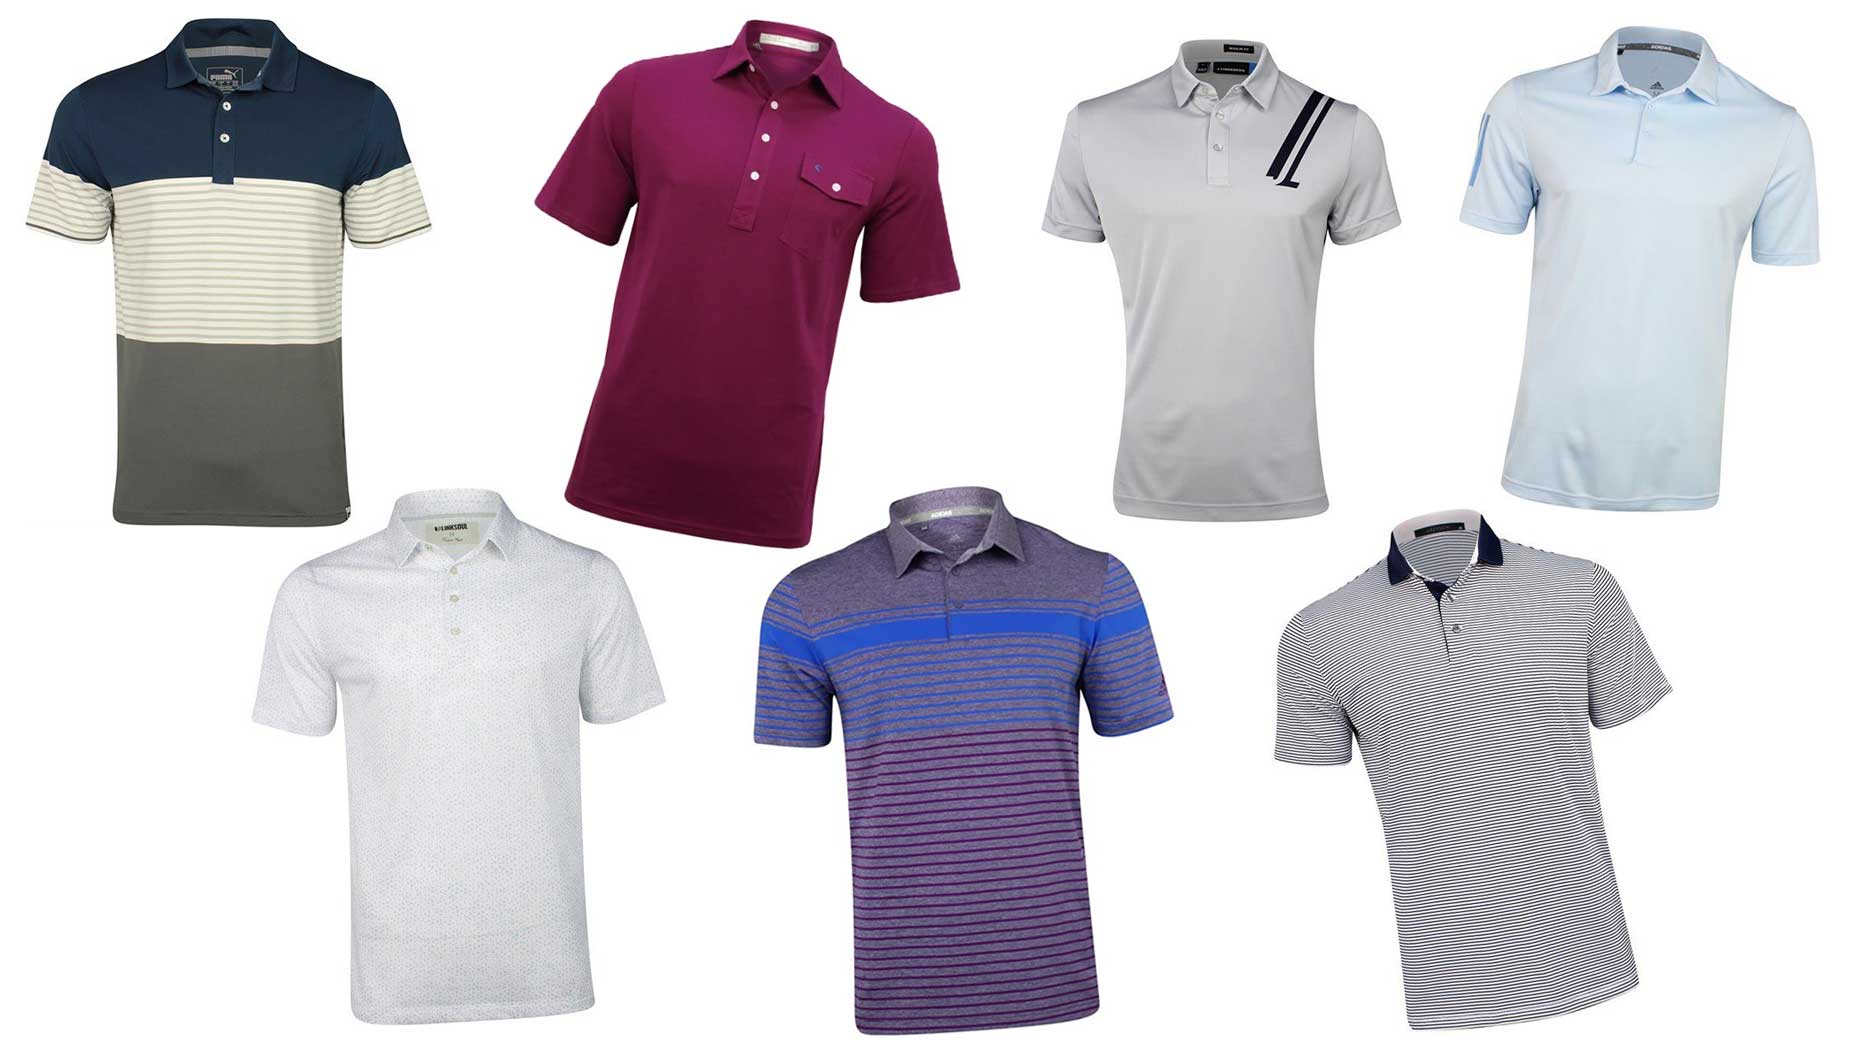 Authenticatie beroerte Oneindigheid The 7 best golf polos to buy in our Pro Shop for every style